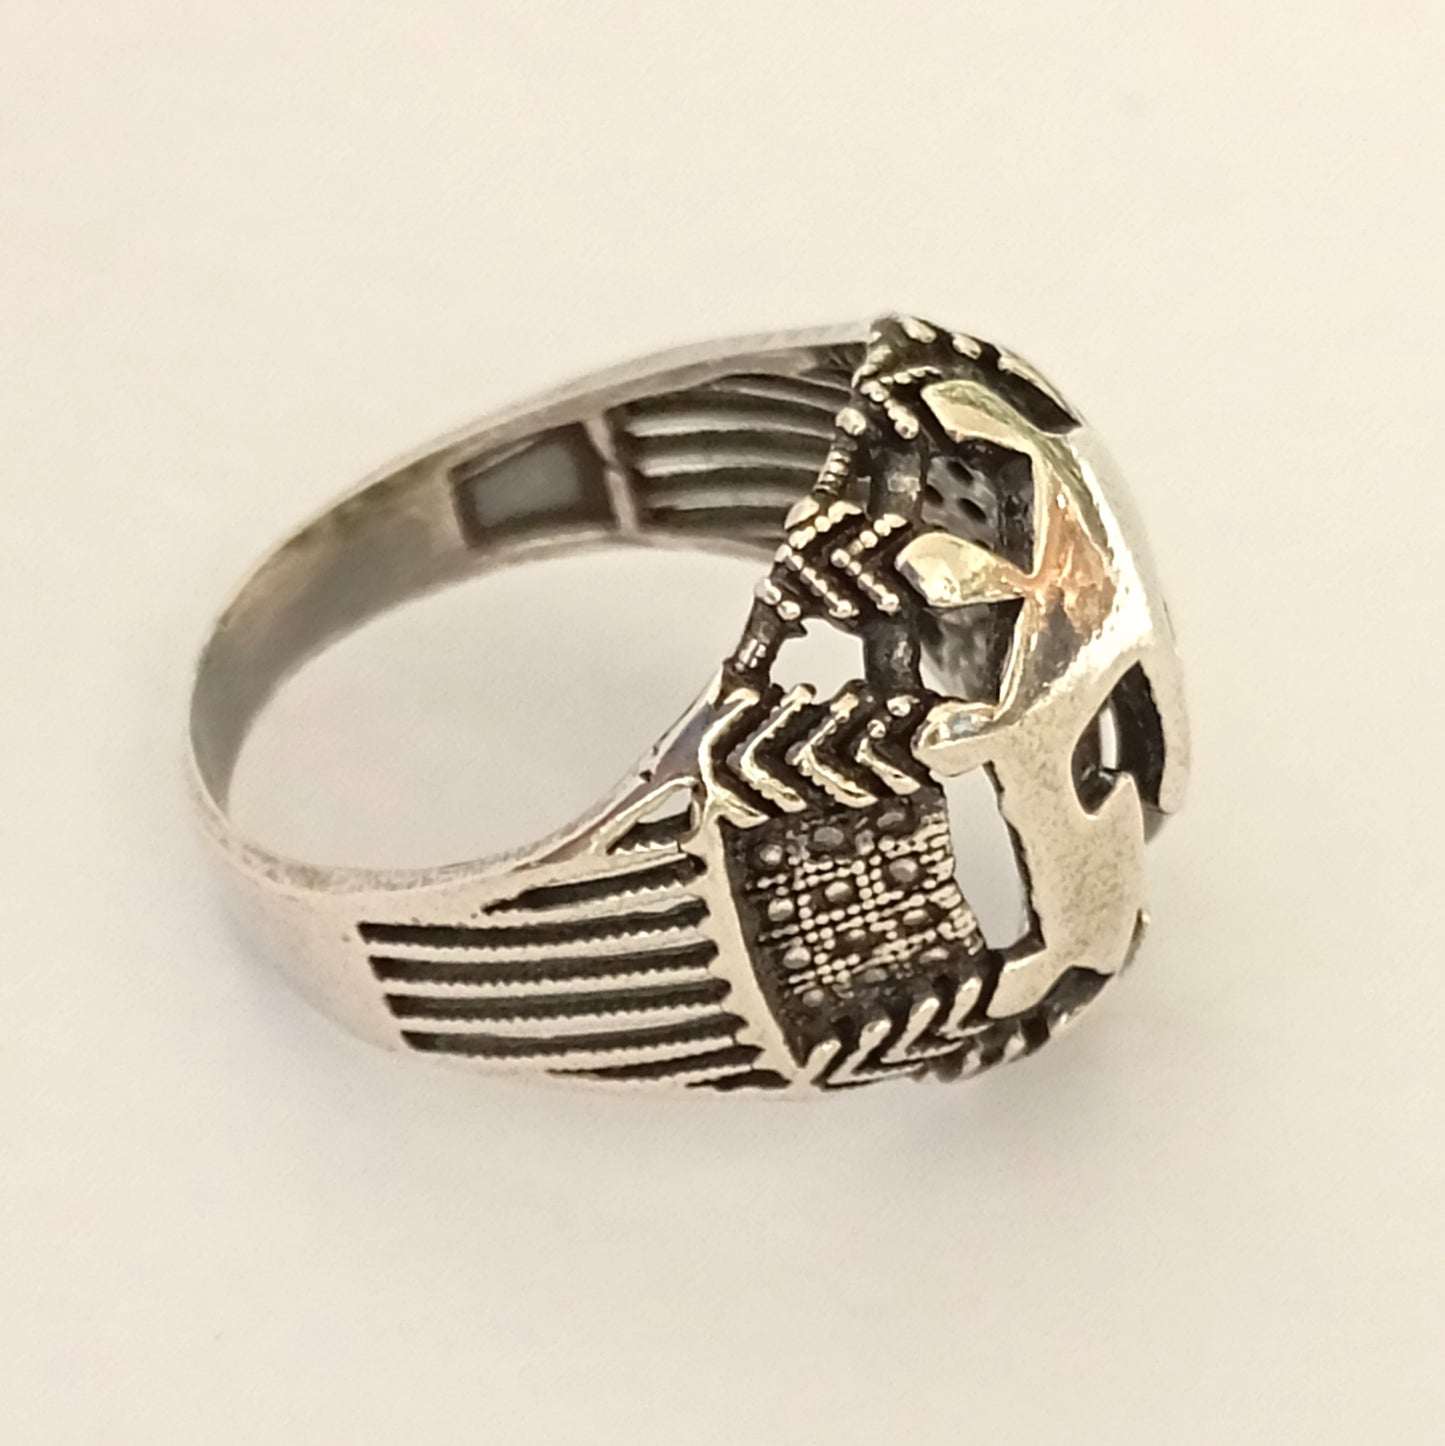 Spartan Helmet - King Leonidas - 300 Spartans - Battle of Thermopylae - 480 BC - Ring - Size EU 65 - Size US 11 - 925 Sterling Silver